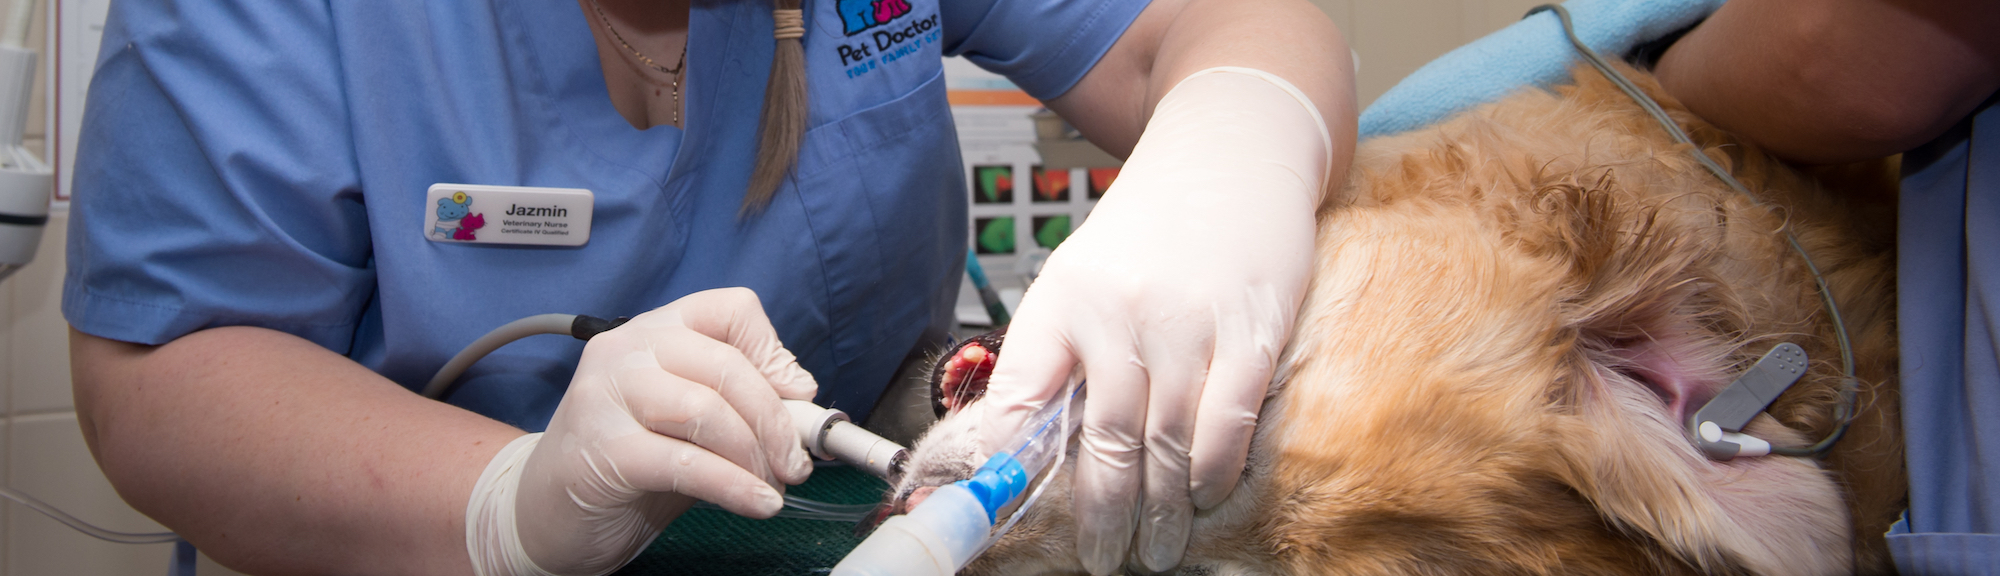 dental services performed on a dog